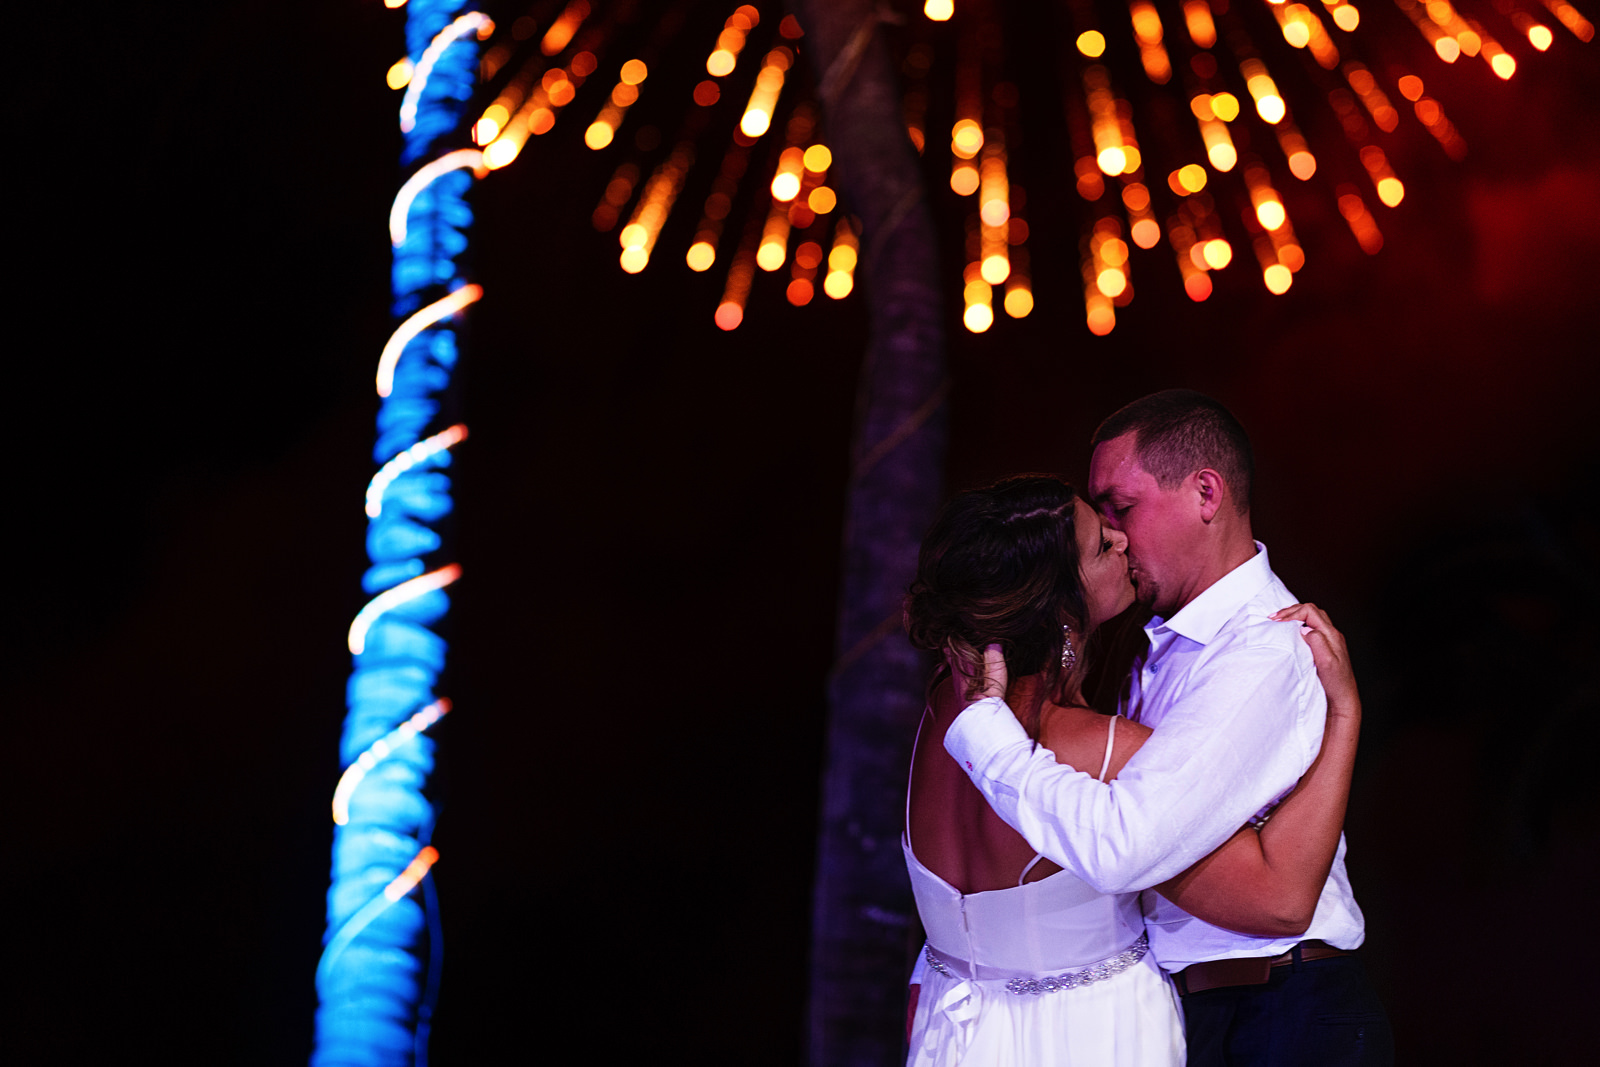 Bride and groom kiss on their first dance under fireworks